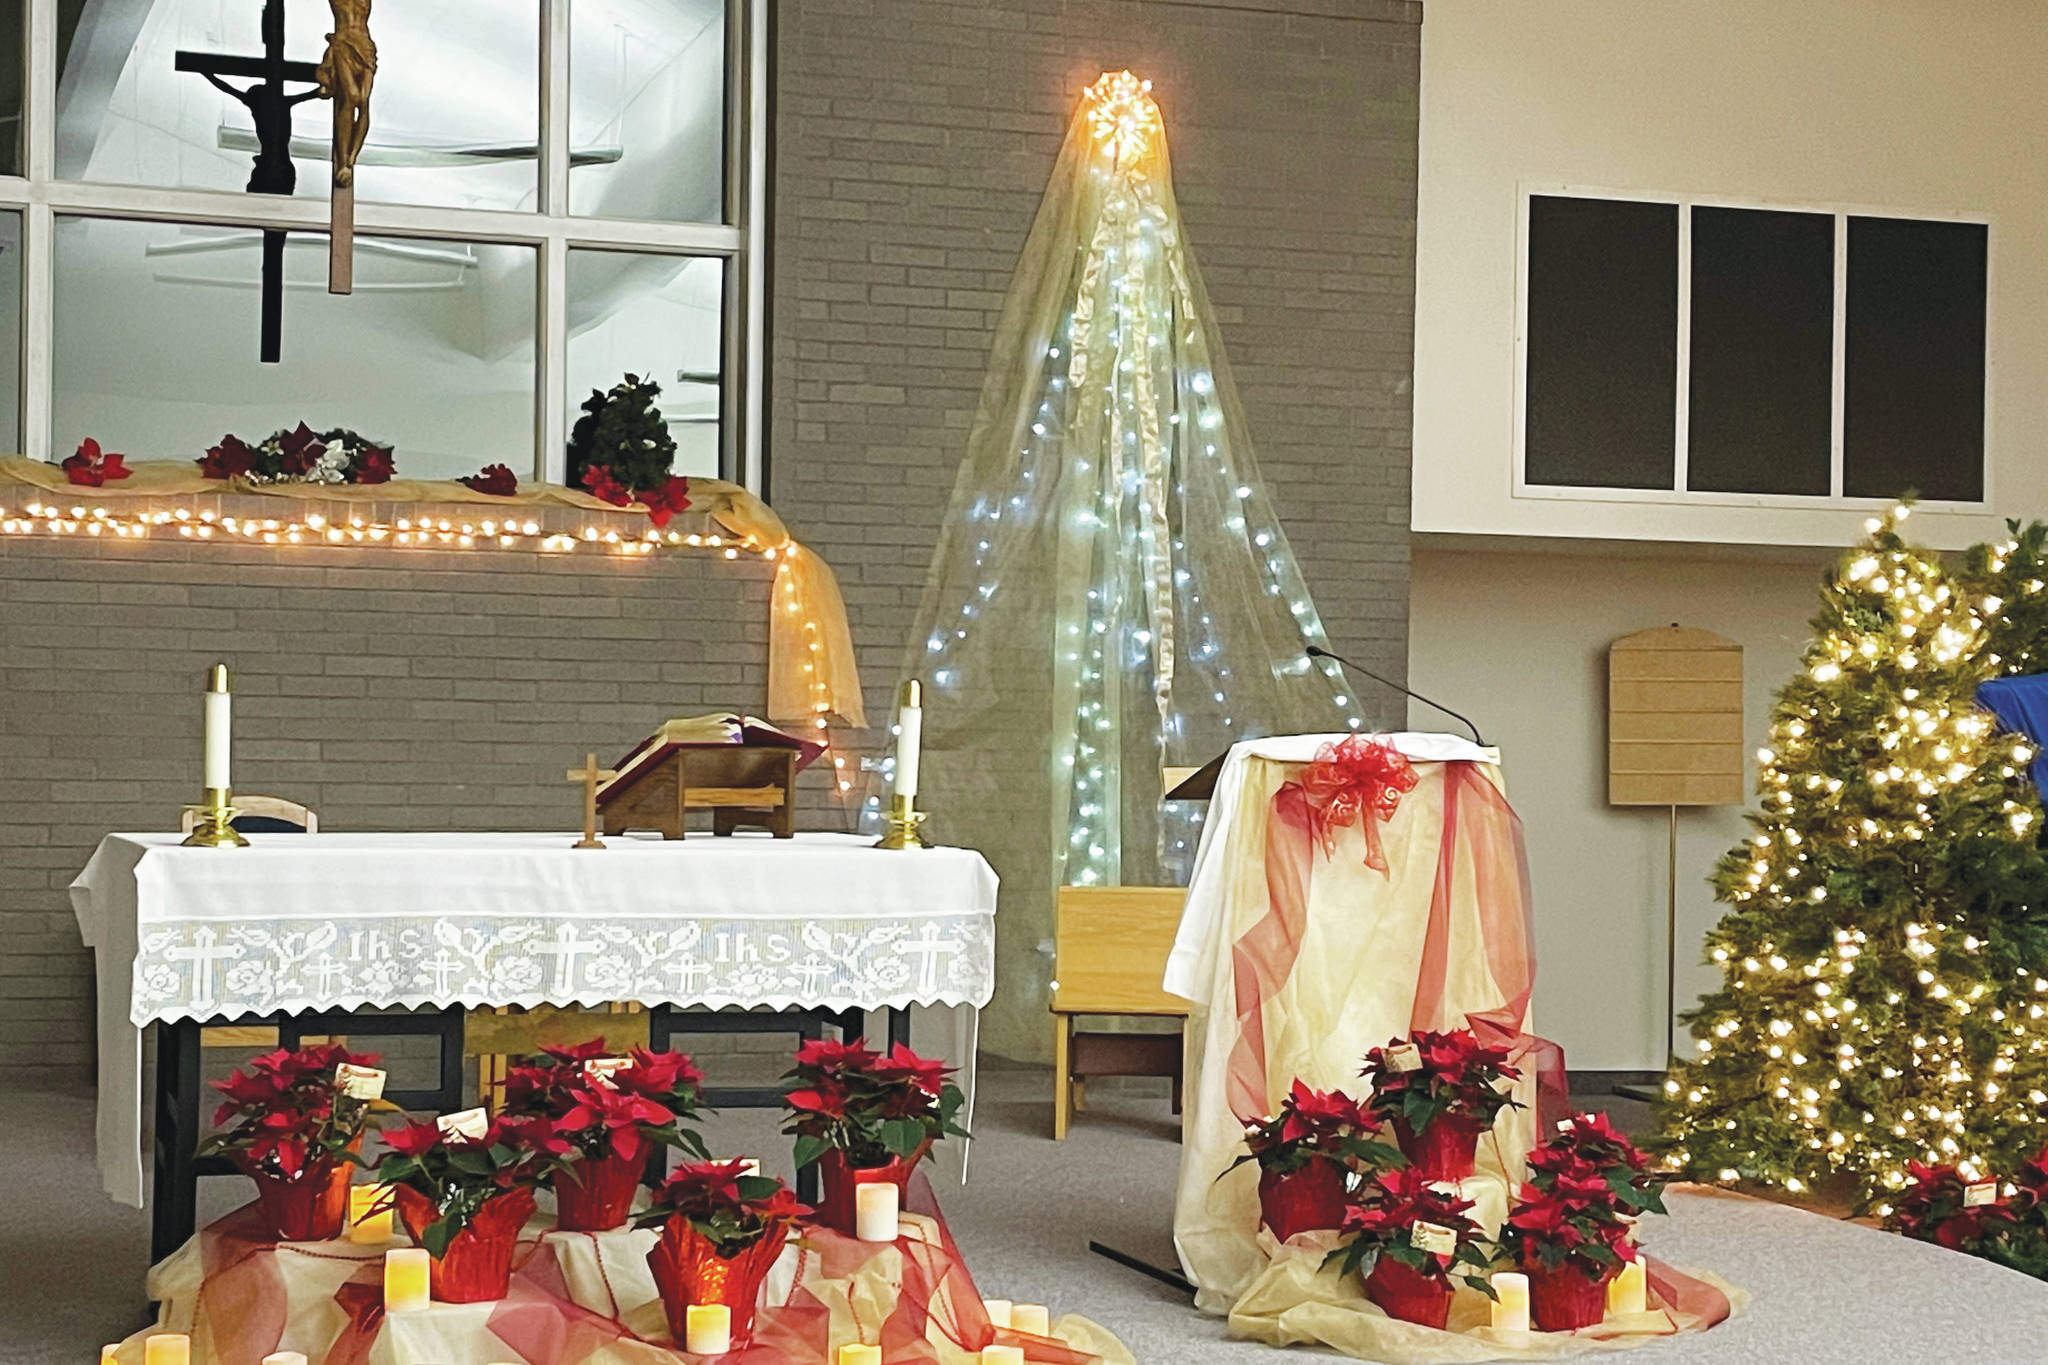 An altar at Our Lady Perpetual Help Catholic Church is seen on Wednesday, Dec. 23, 2020, in Soldotna, Alaska. (Photo courtesy of Kathryn Dunagan)